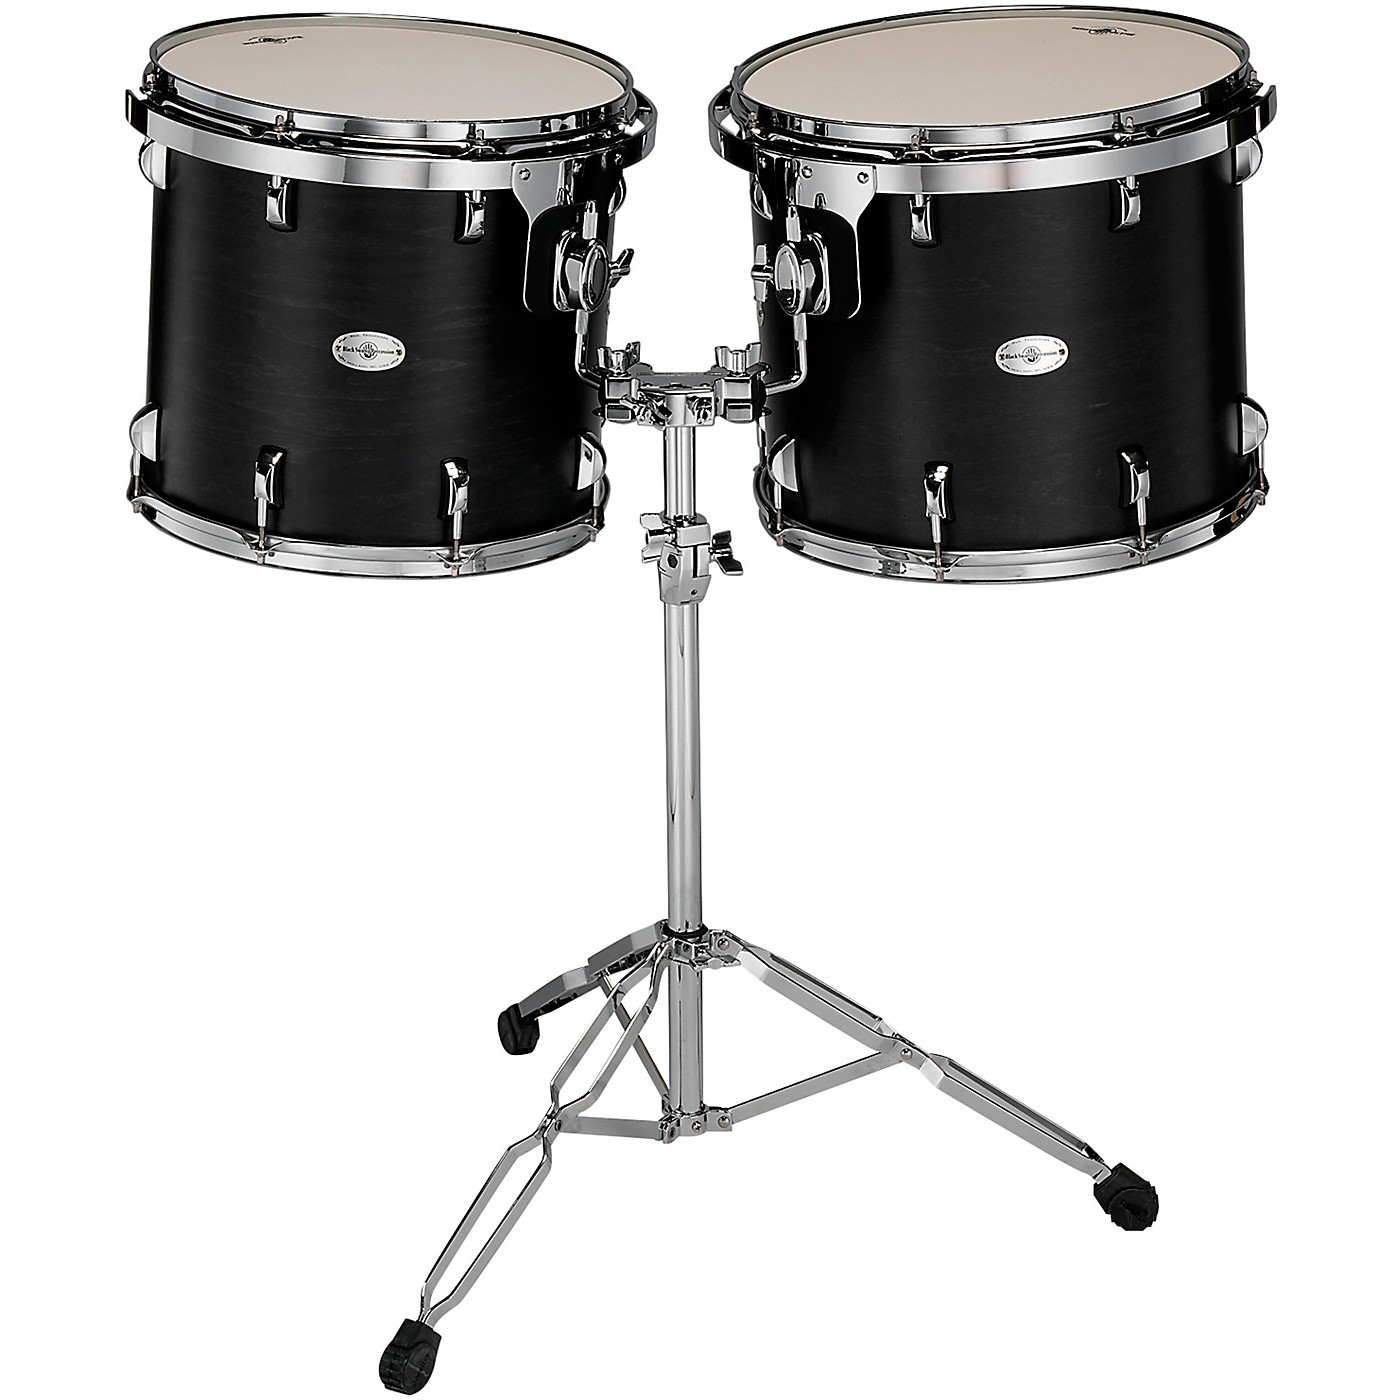 Black Swamp Percussion Concert Black Concert Tom Set with Stand thumbnail